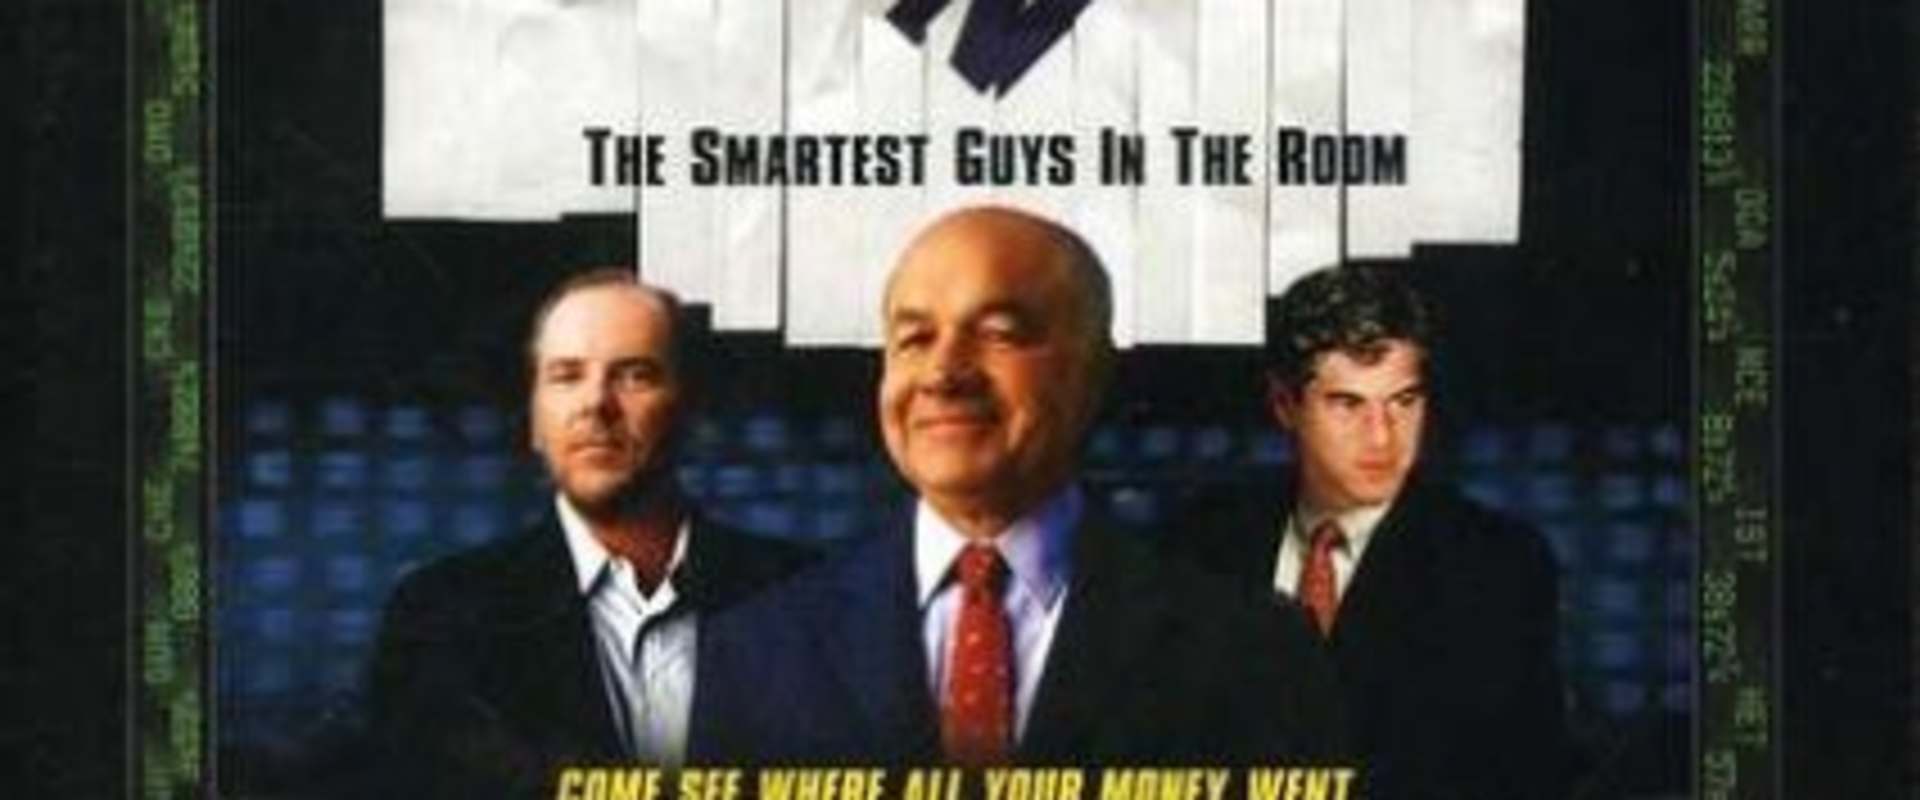 enron the smartest guys in the room movie summary